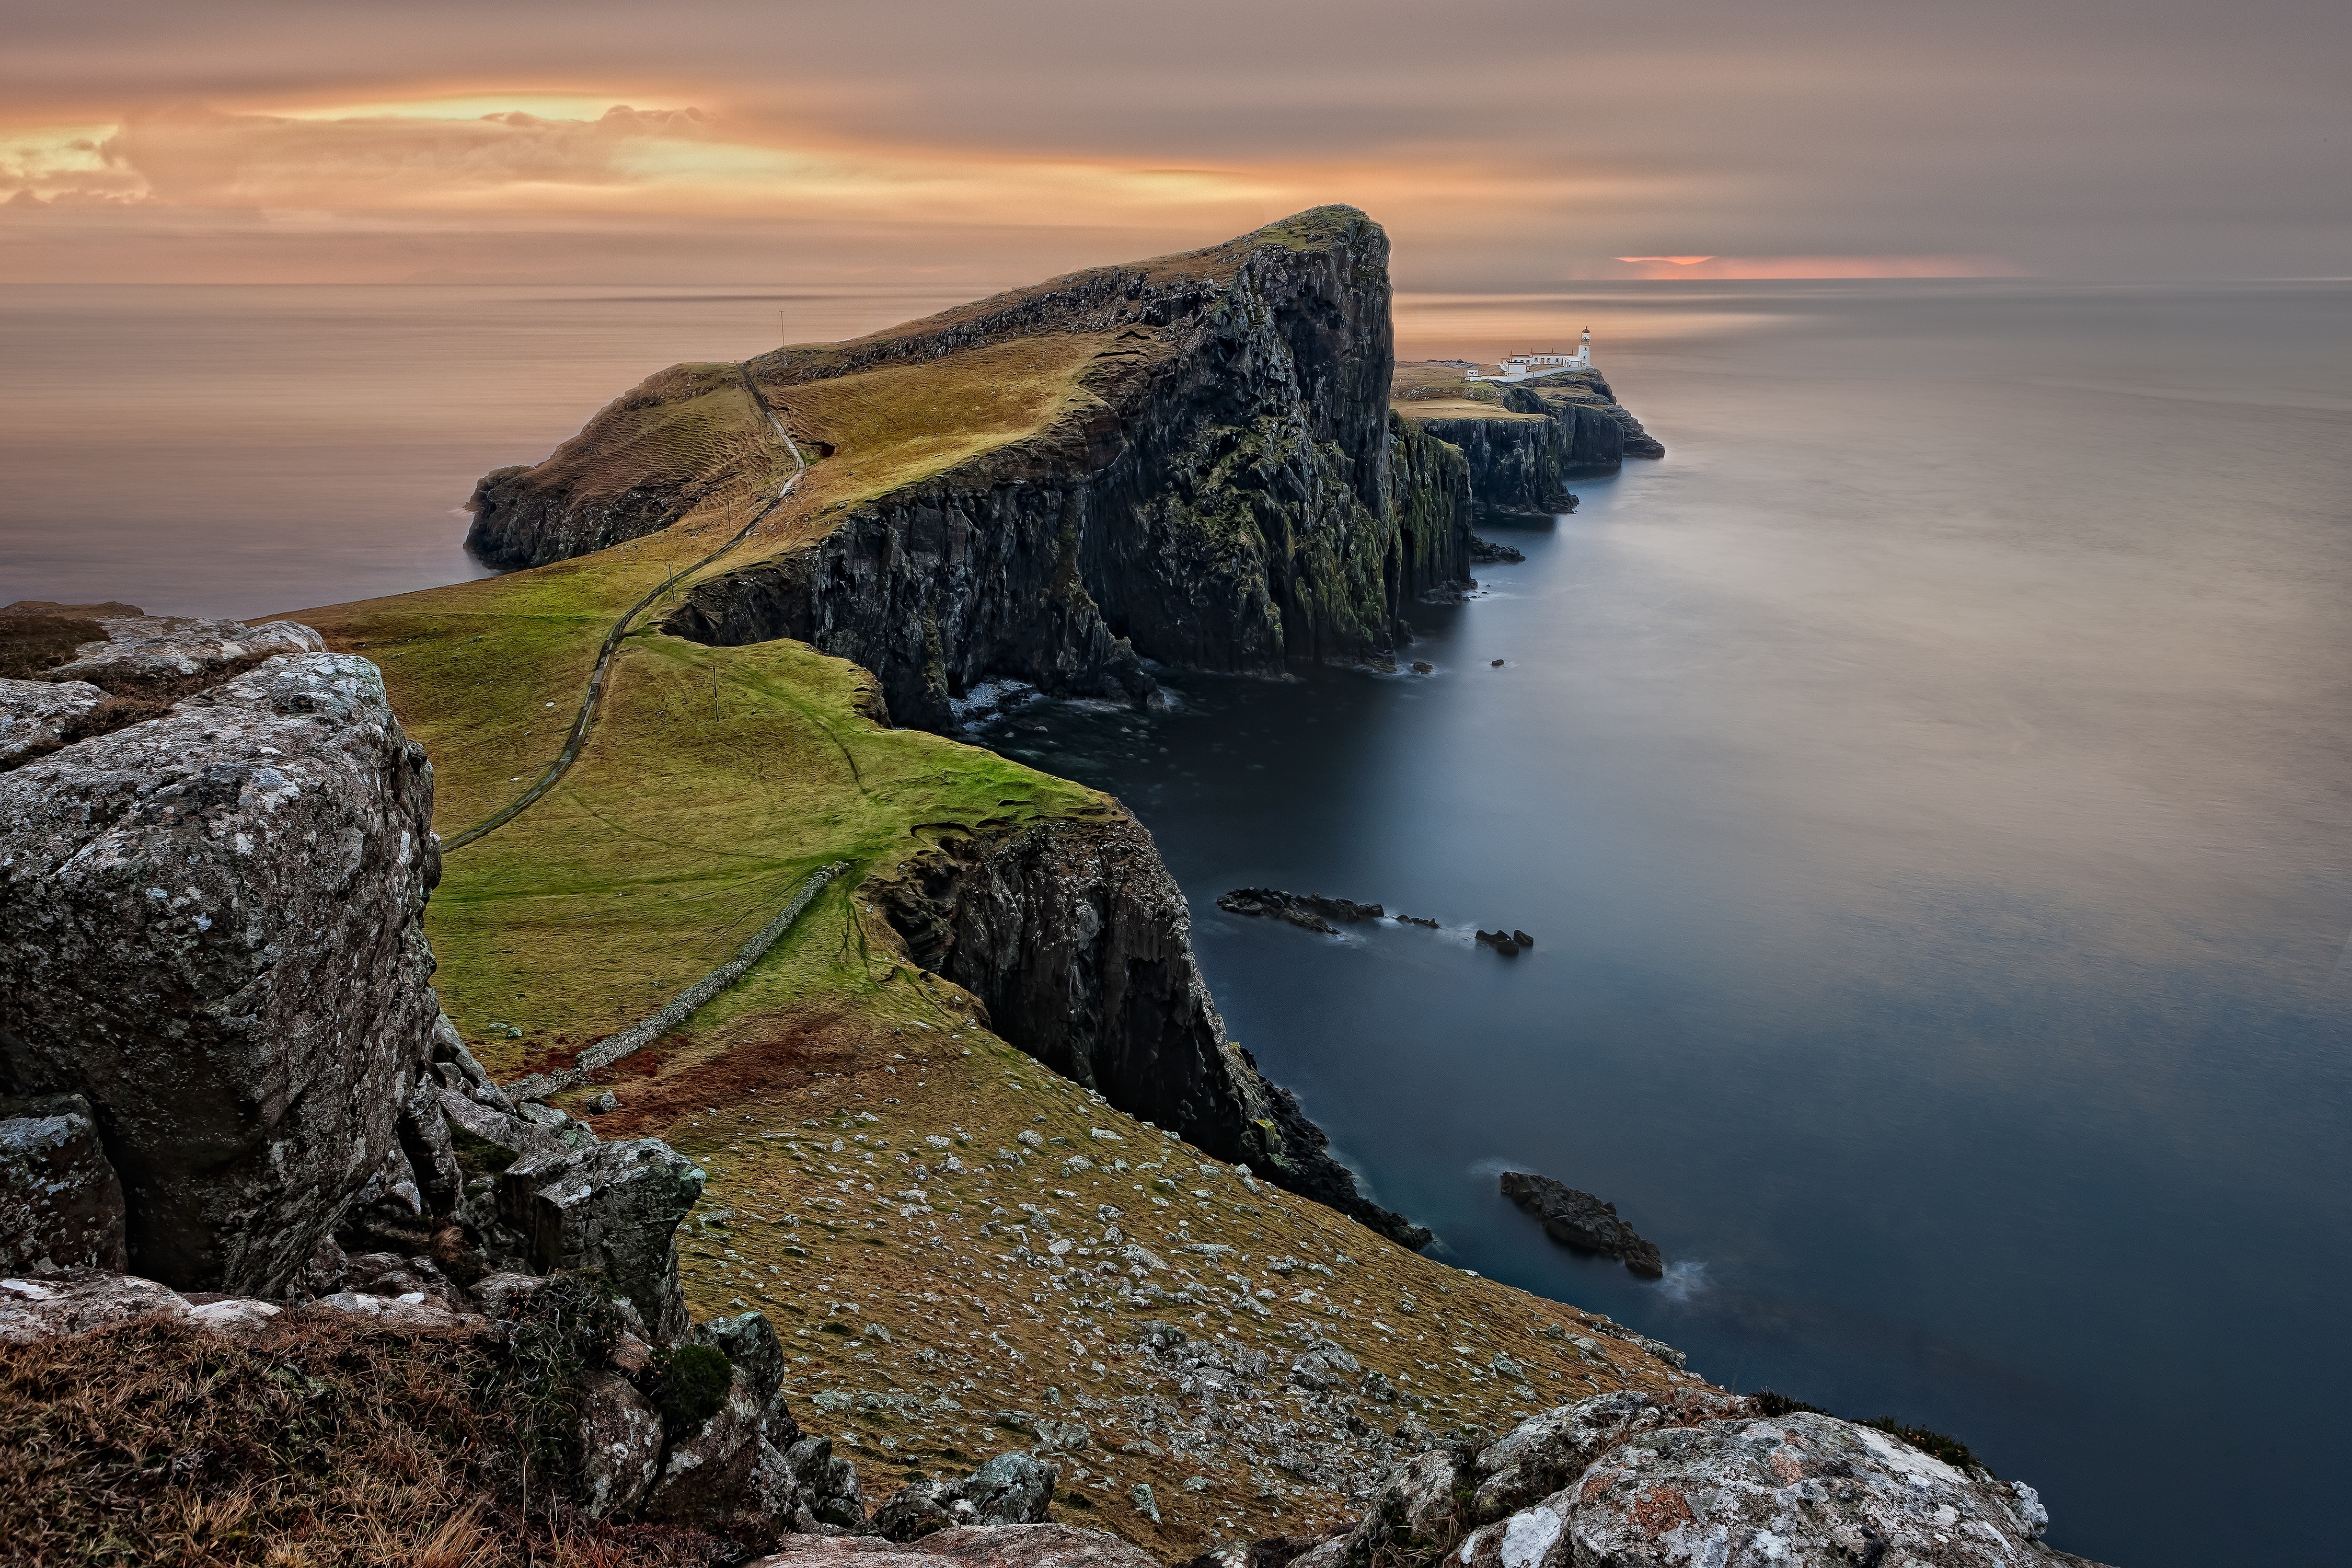 Skye is a must visit on your travel to Scotland. This location is a spot of wanderlust.